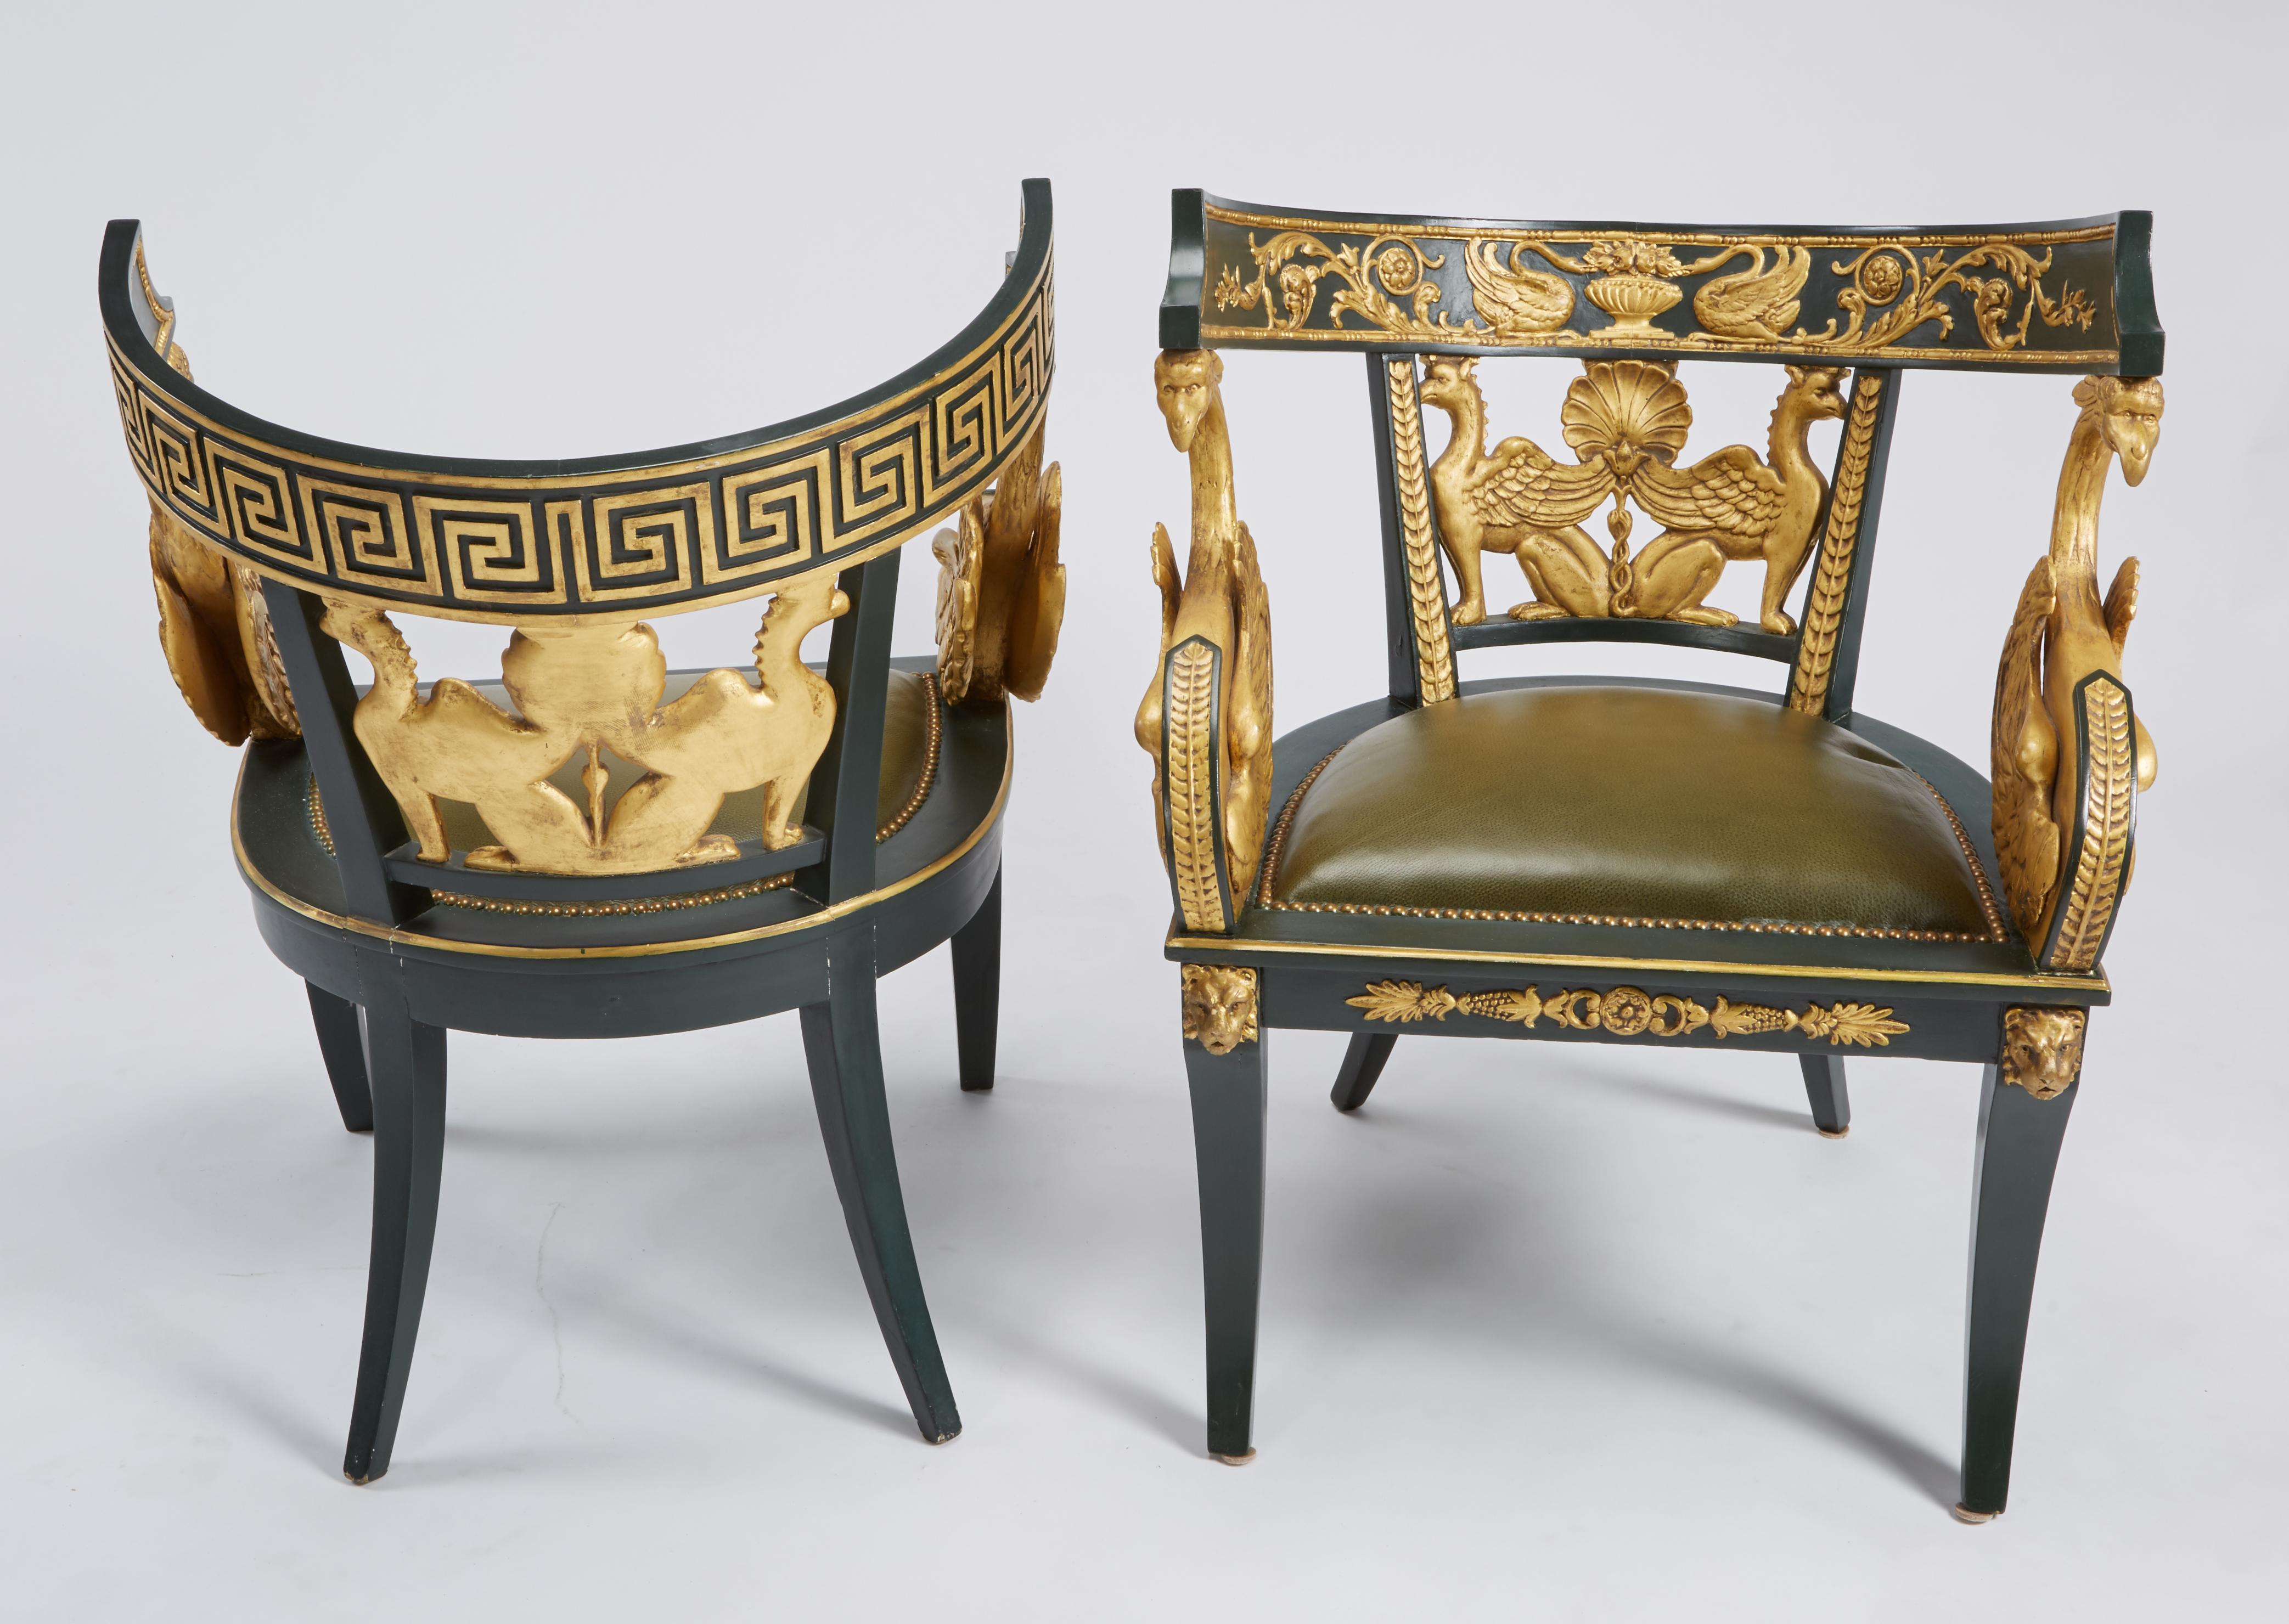 Impressive pair of Imperial Roman Style lounge chairs, having large carved giltwood swans, griffins, lion heads, shell, foliate and Greek key backs with newer Holly Hunt green leather upholstery and brass tacks on sabre legs. Italian, circa 1920s